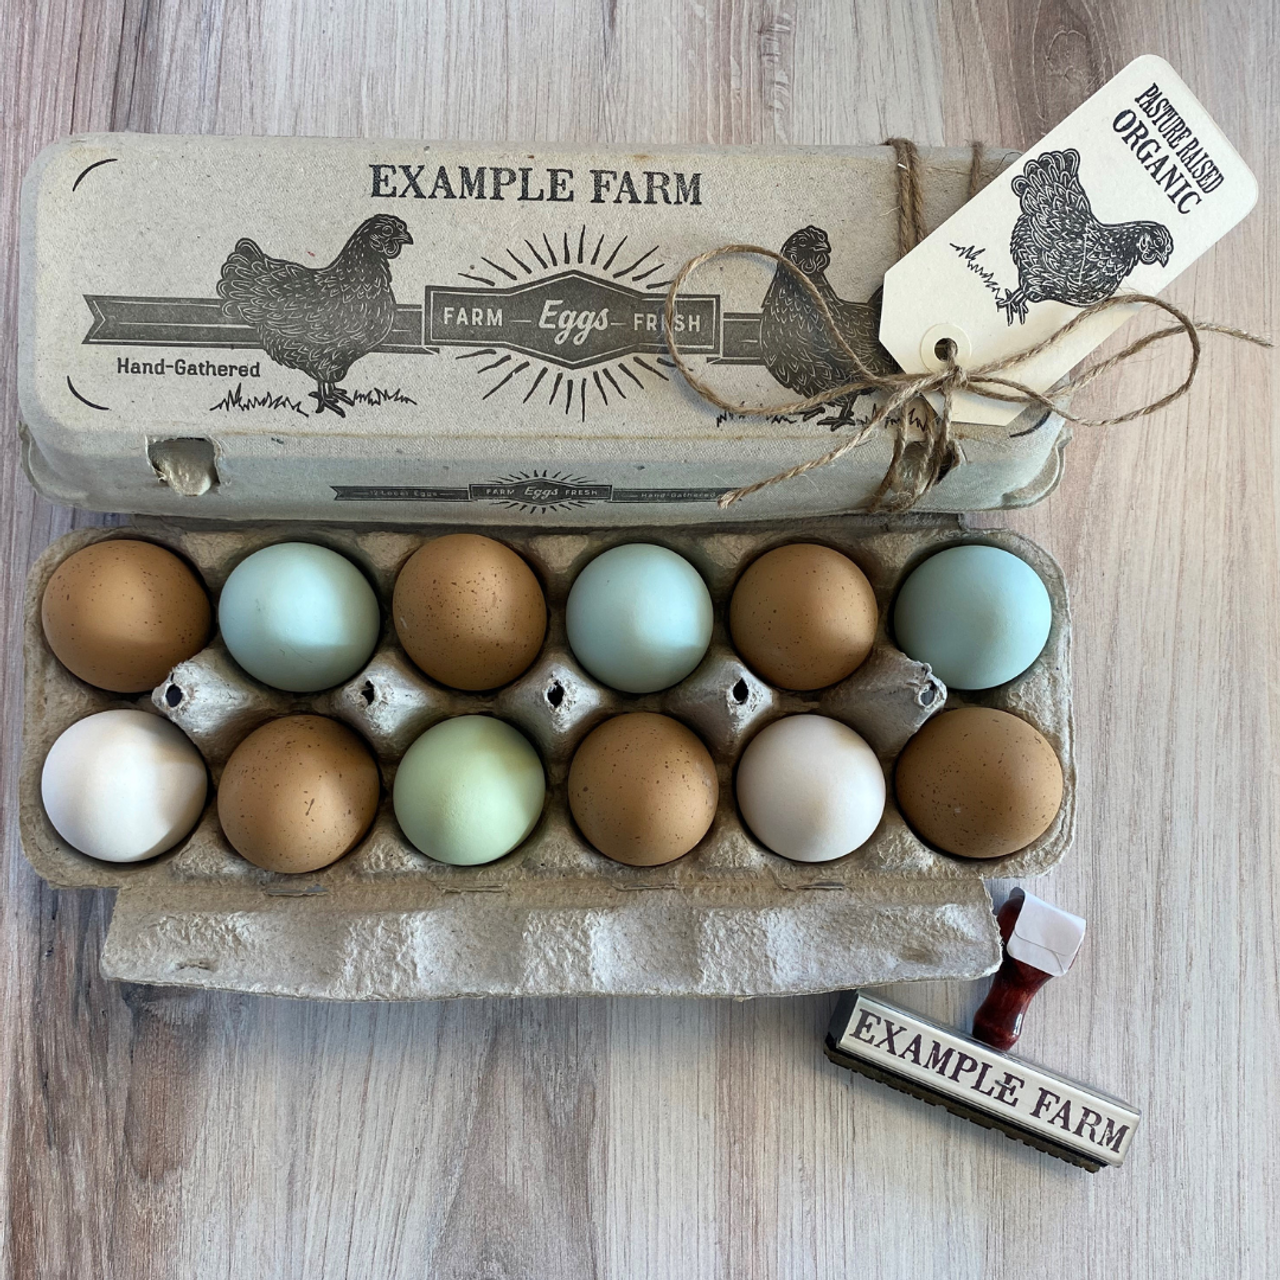 Self Inking Stamp for Personalized Egg Box Saying Just Got Laid Egg Carton  Stamp Then Your Farm Name as a Custom Stamps Self Inking for Business Large